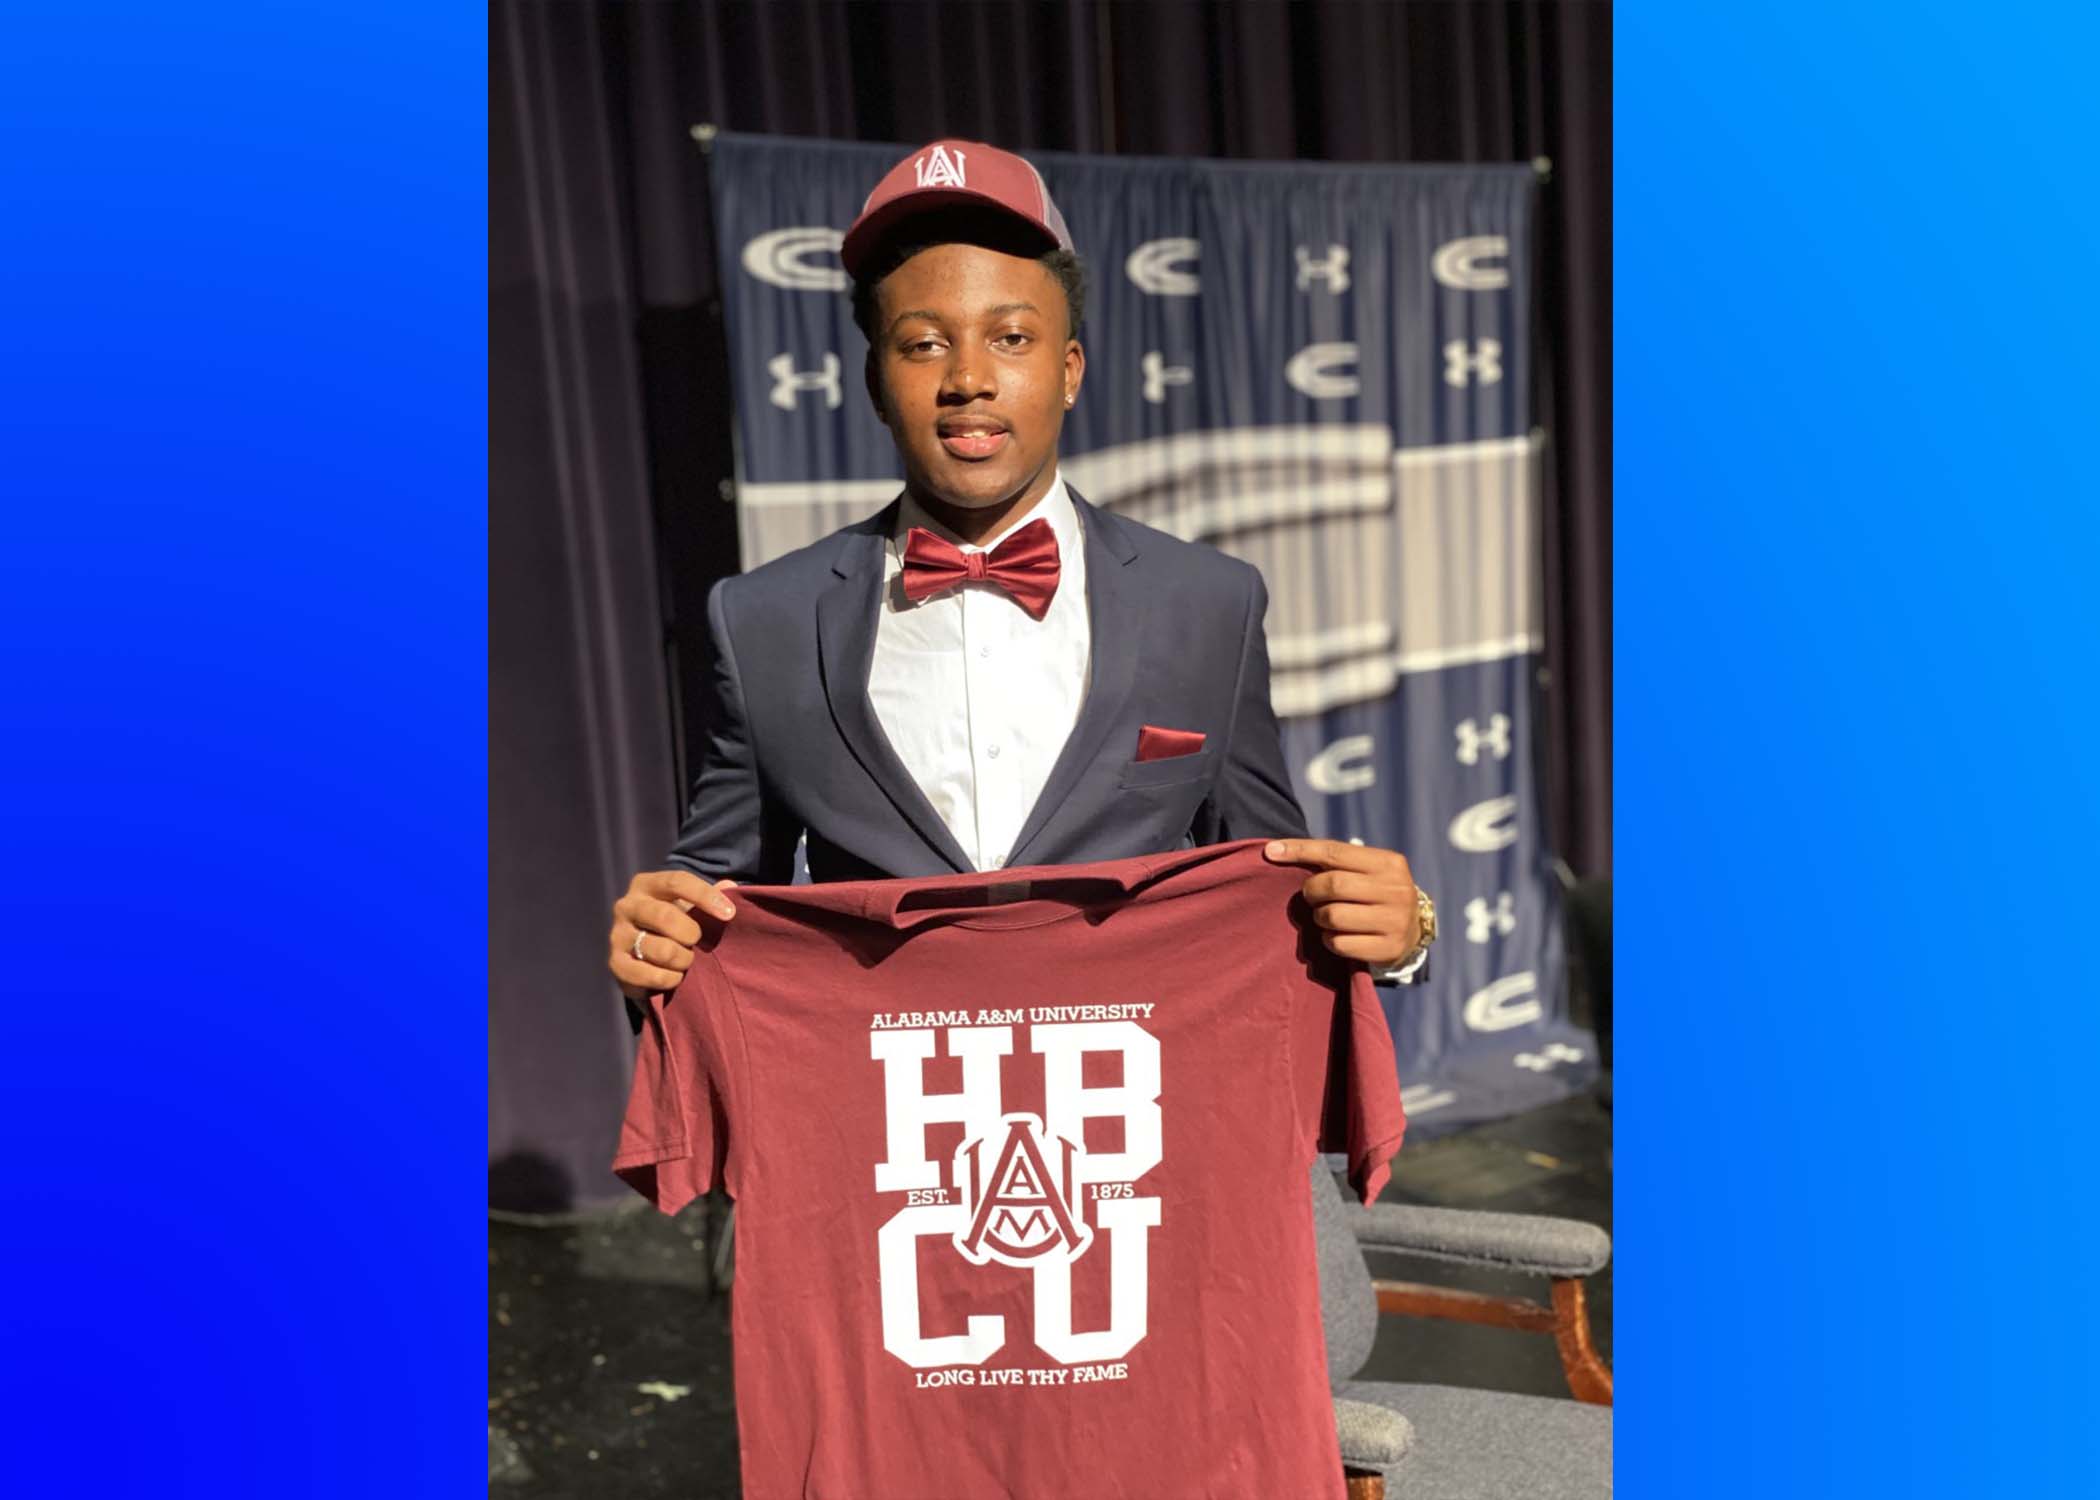 Clay-Chalkville student signs with Alabama A&M University